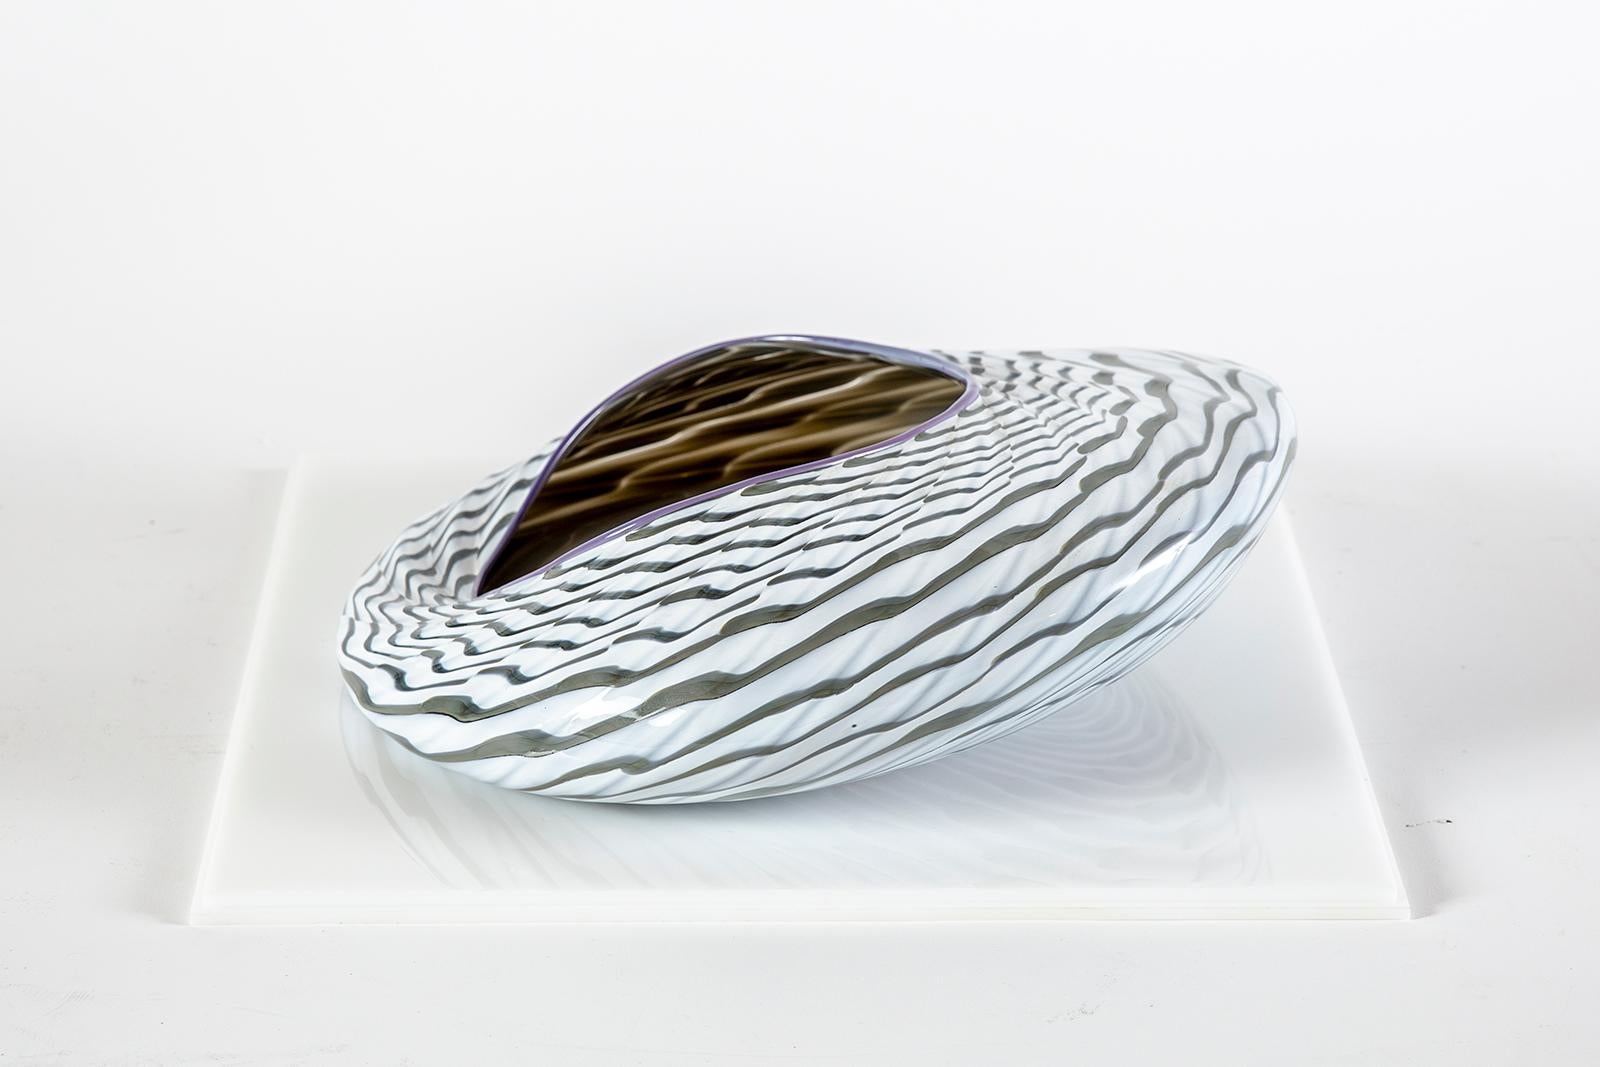 Dale Chihuly – Sea Form Bowl, 1984
Hand-blown Glass
Size: 12 inches
Signed and dated by the artist
Condition: Mint
Certificate of Authenticity included

With each of his series, Dale Chihuly pushed the glass making process to its limits. Evolving